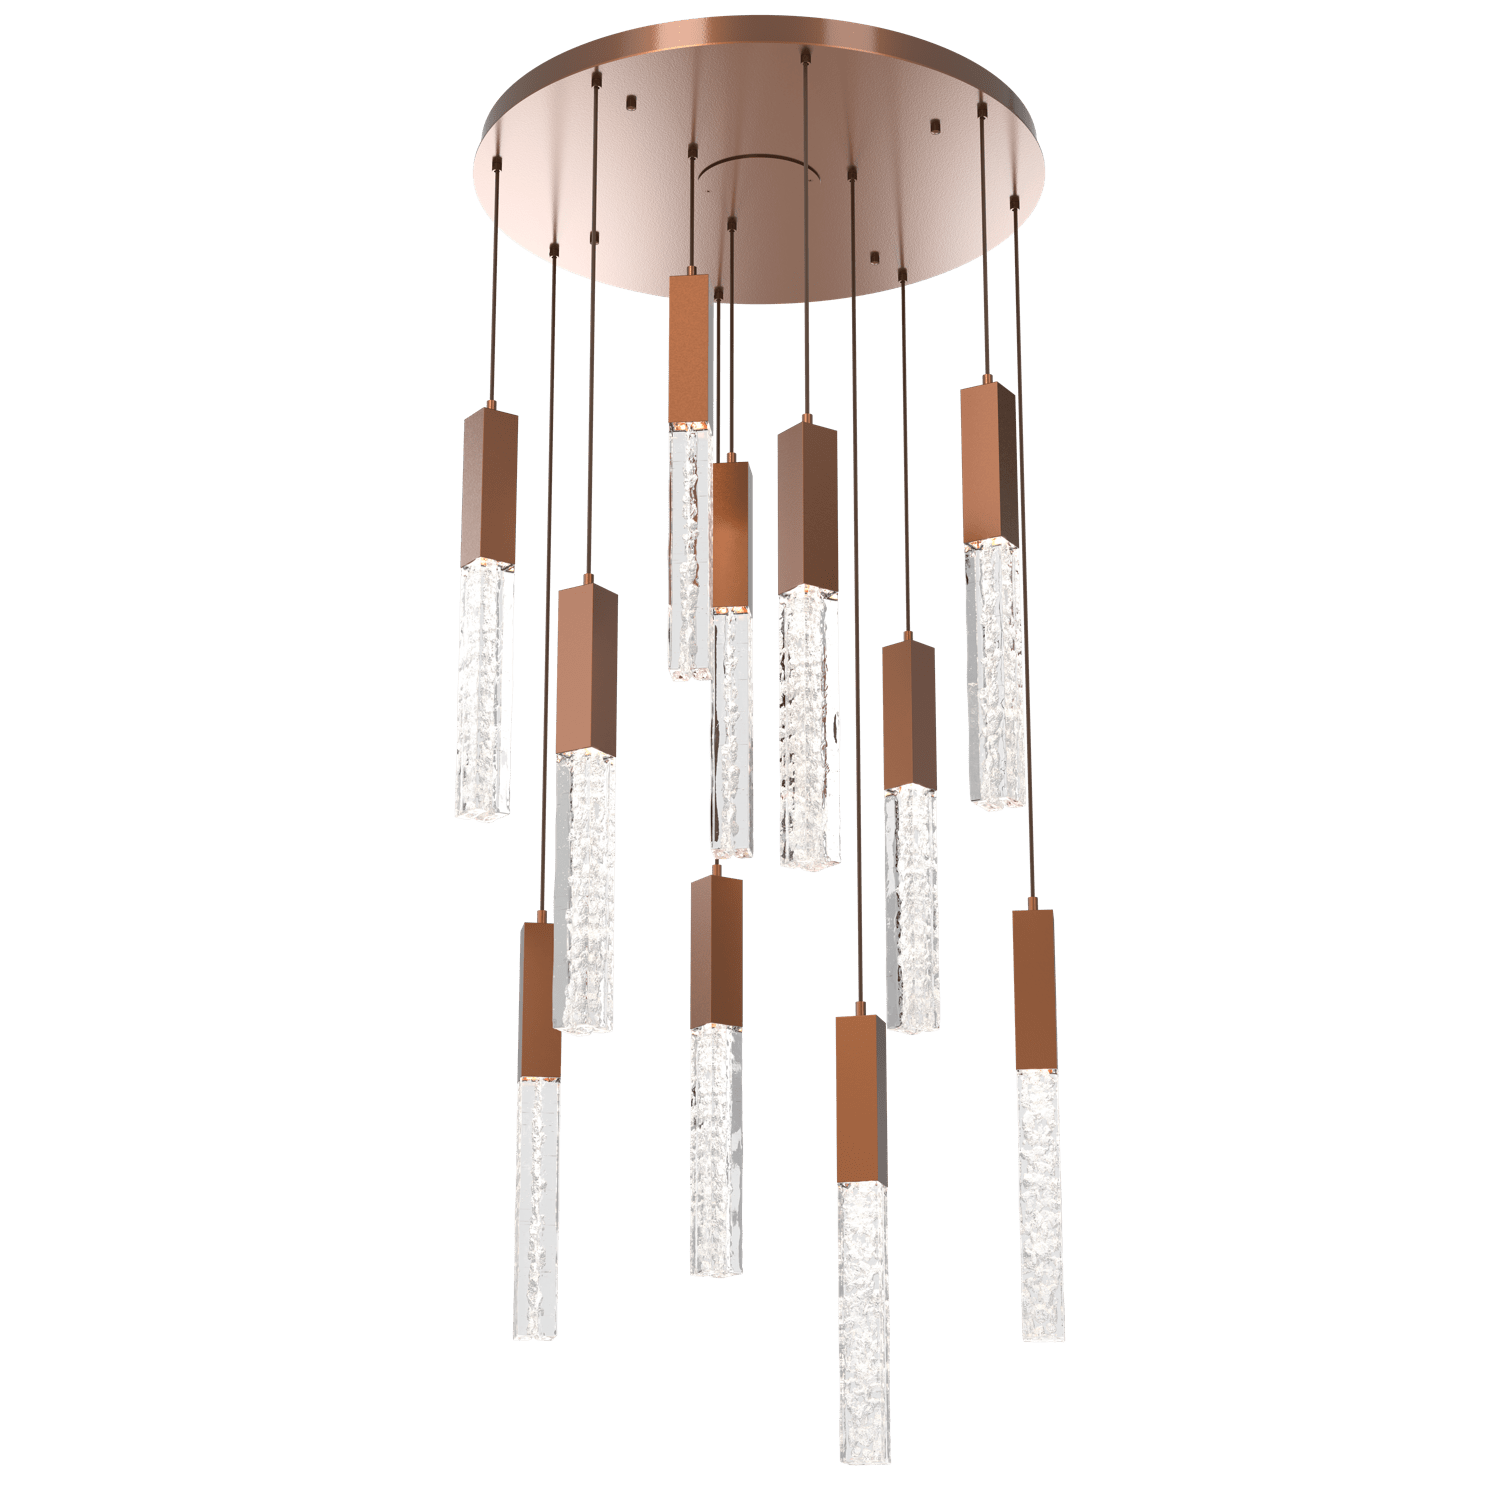 CHB0060-11-BB-GC-Hammerton-Studio-Axis-11-Light-Pendant-Chandelier-with-Burnished-Bronze-finish-and-clear-cast-glass-and-LED-lamping